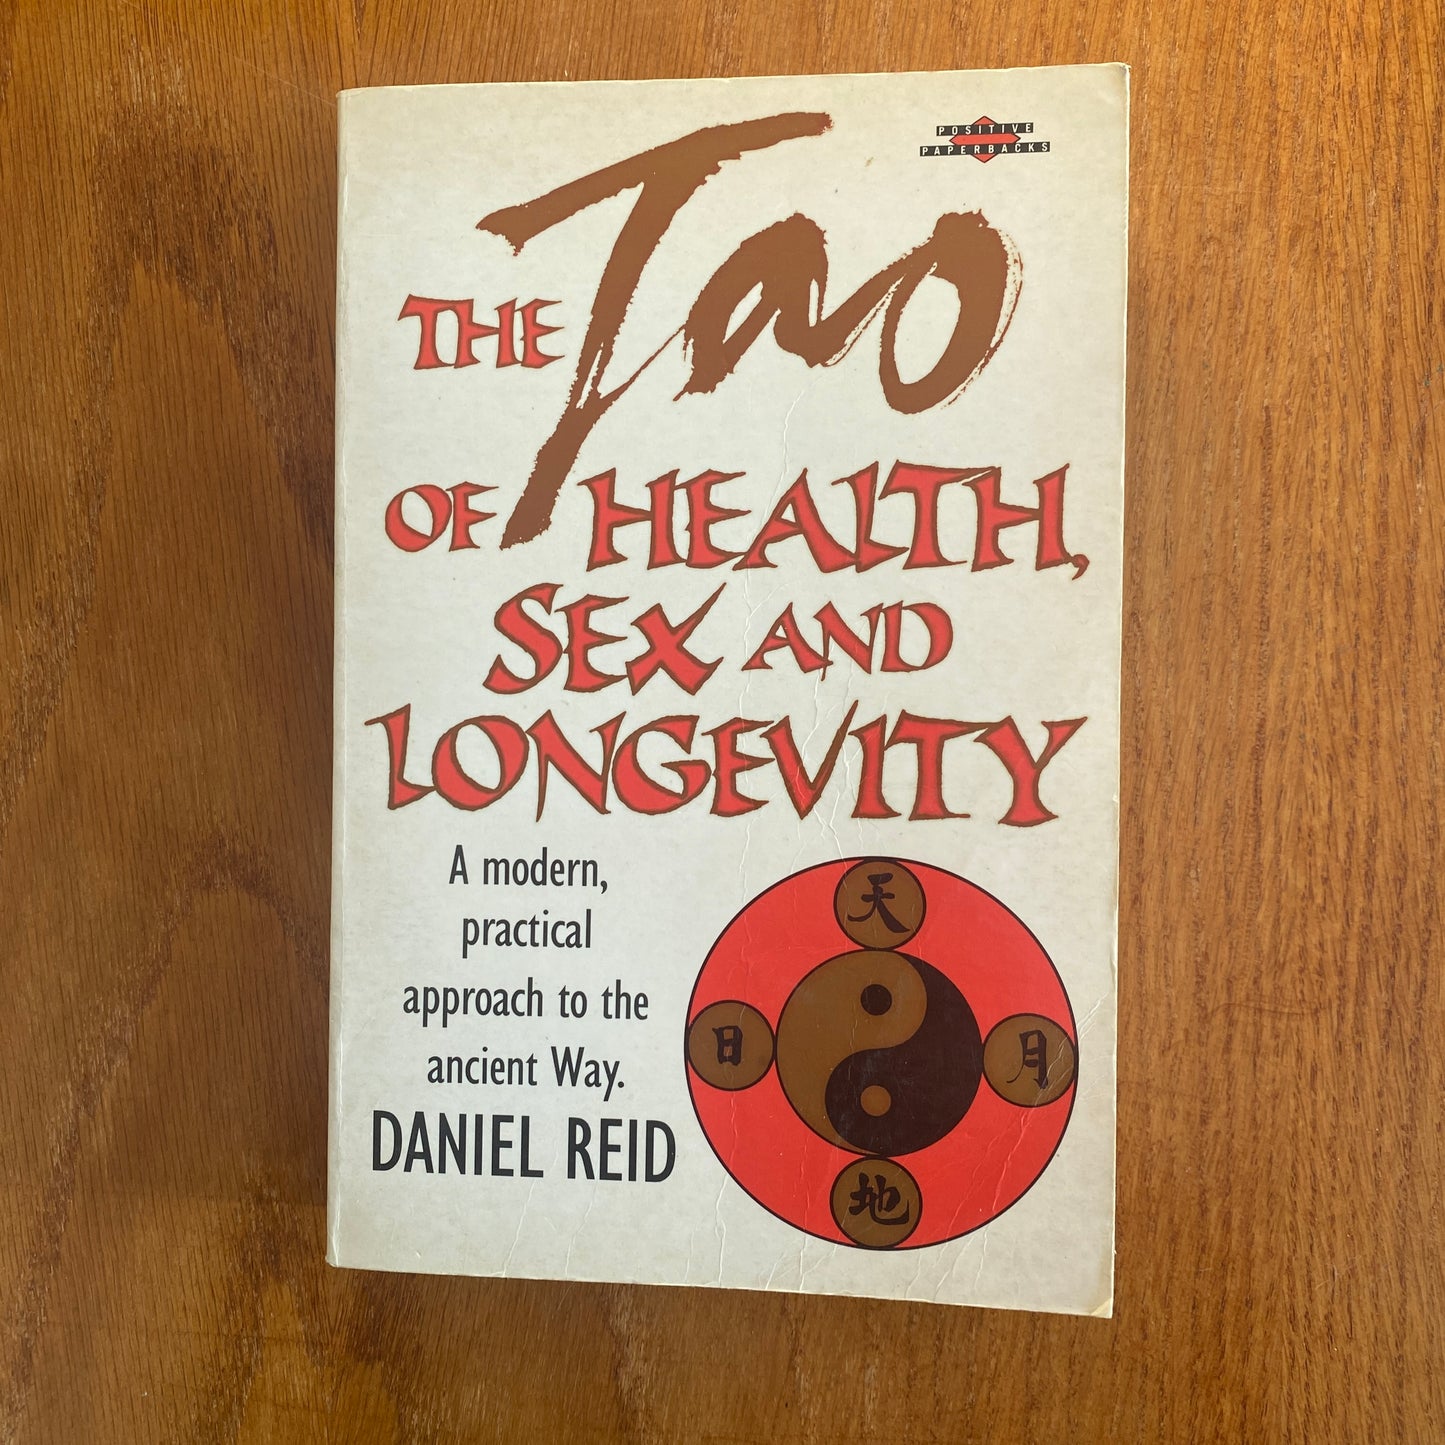 The Tao Of Health, Sex, & Longevity: A Modern, Practical Approach To The Ancient Way - Daniel Reid